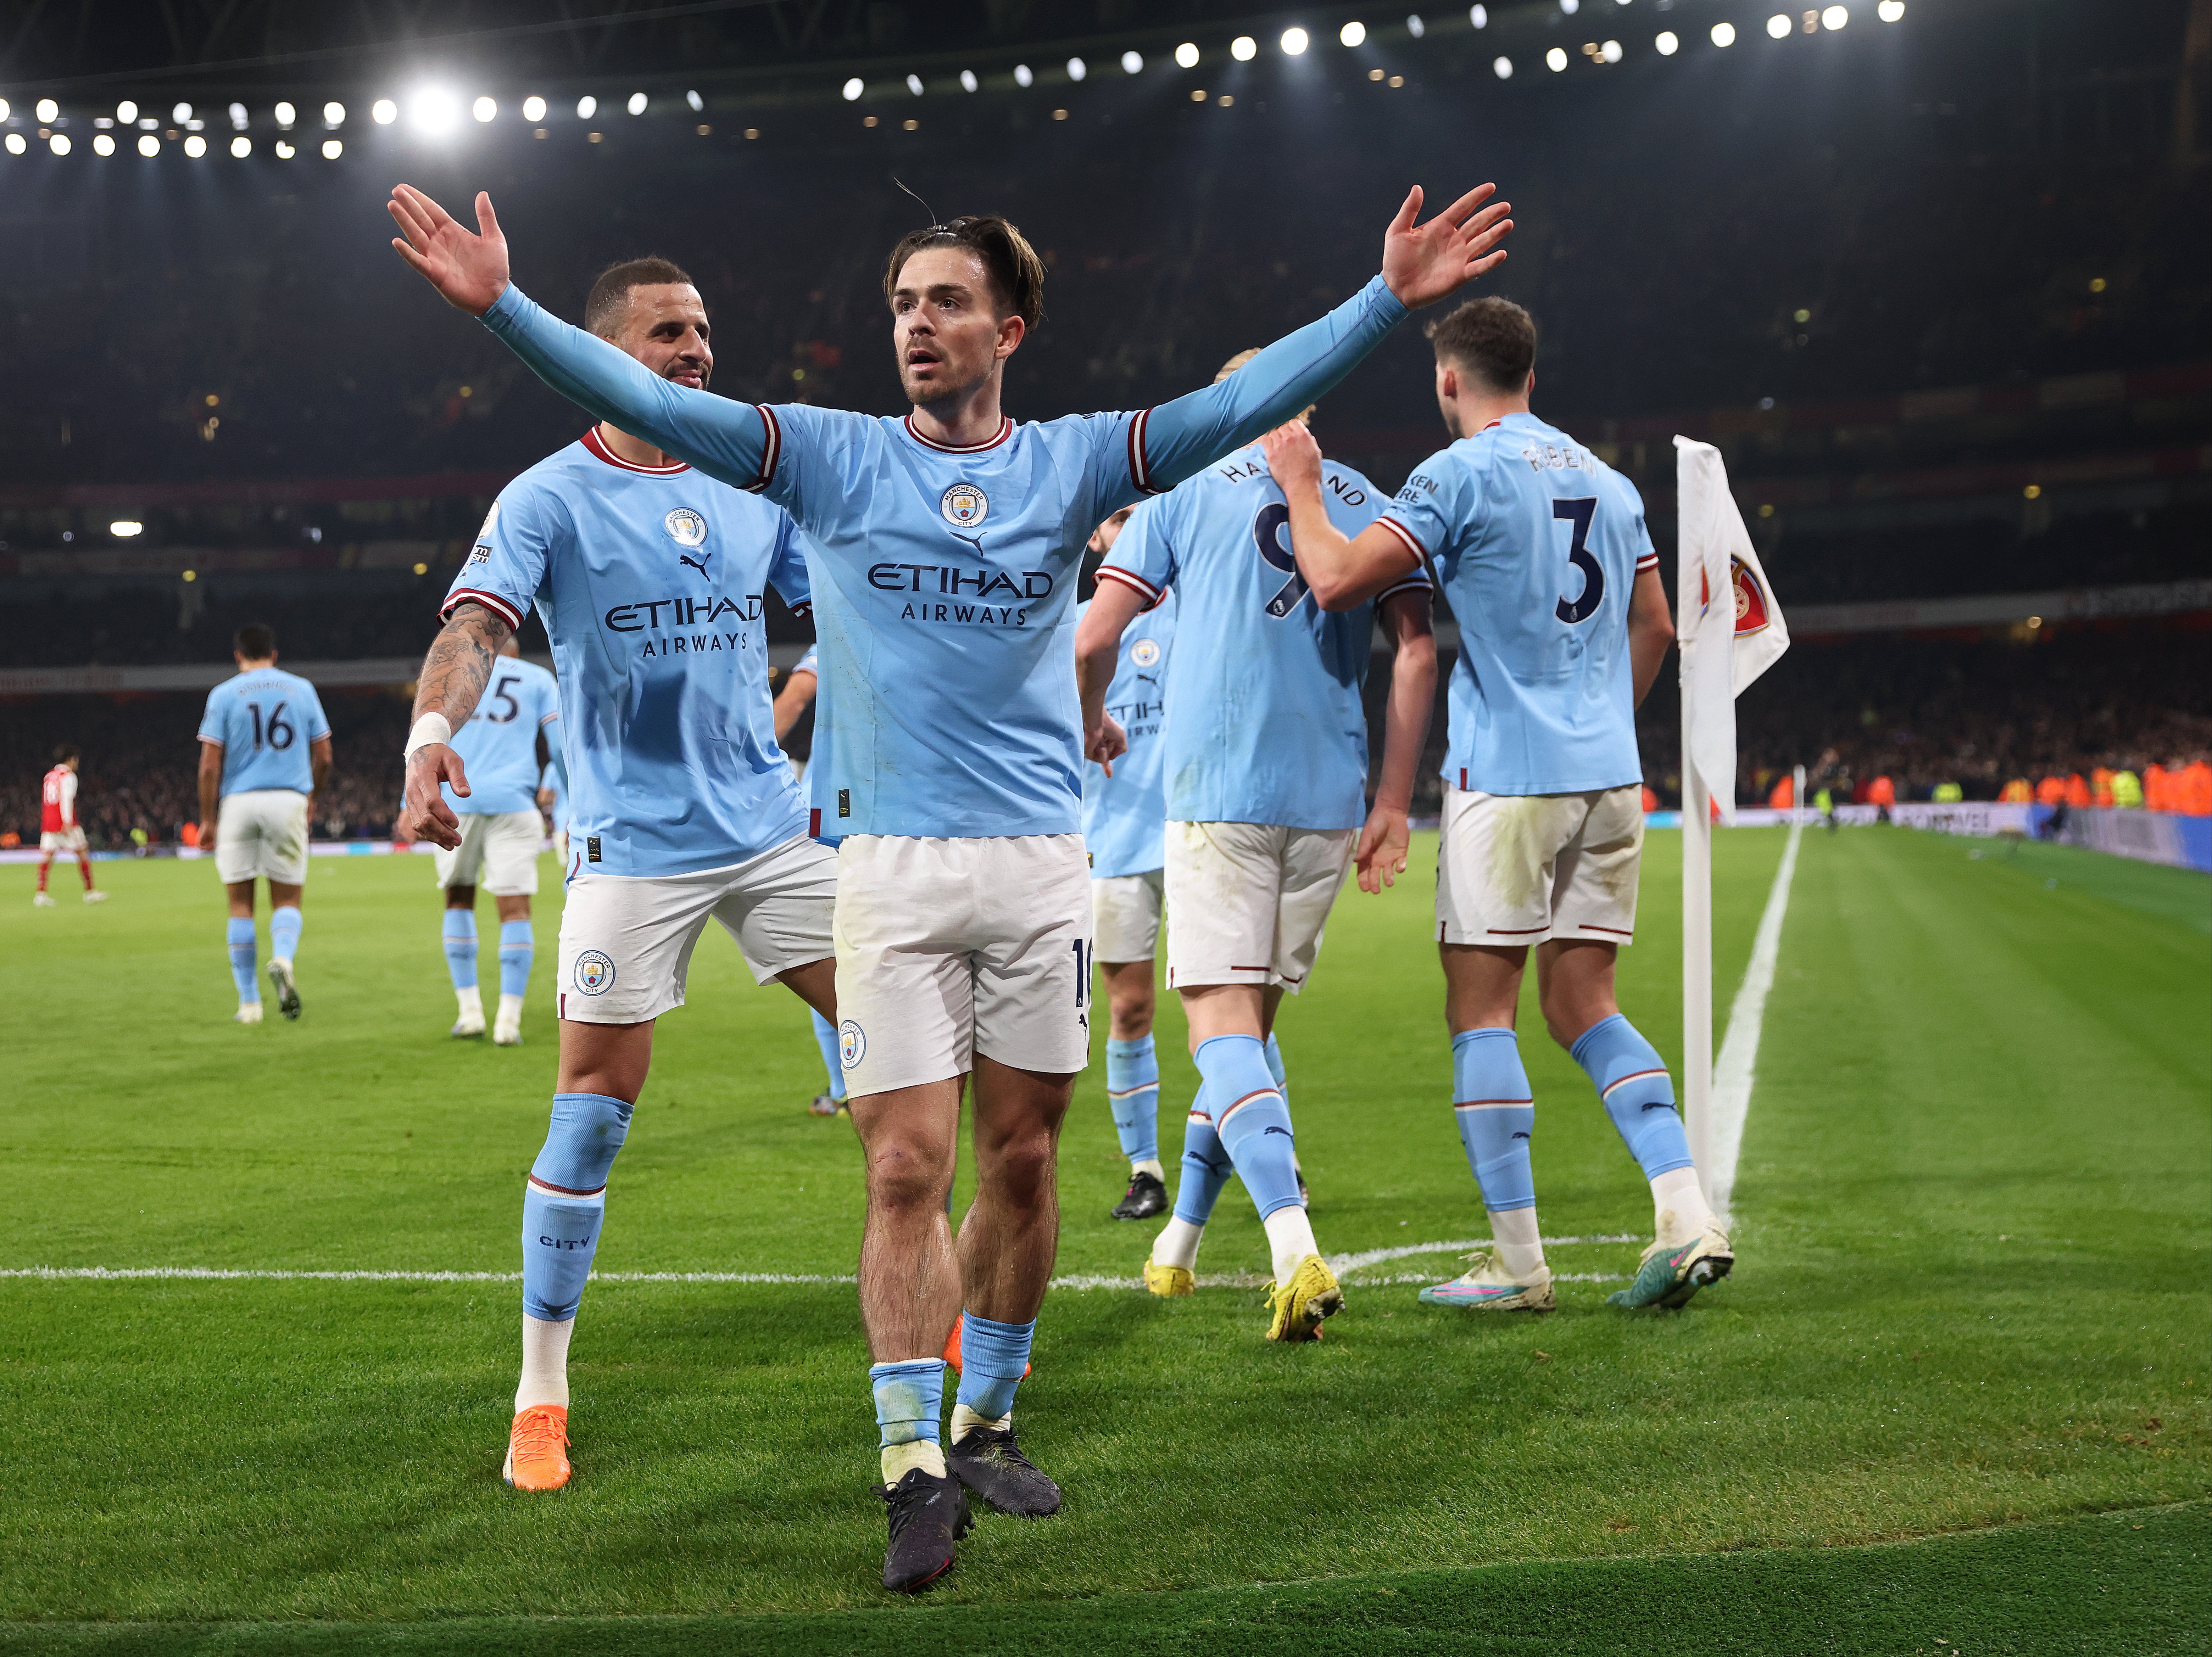 Arsenal vs Man City result Final score, goals, highlights and Premier League match report The Independent